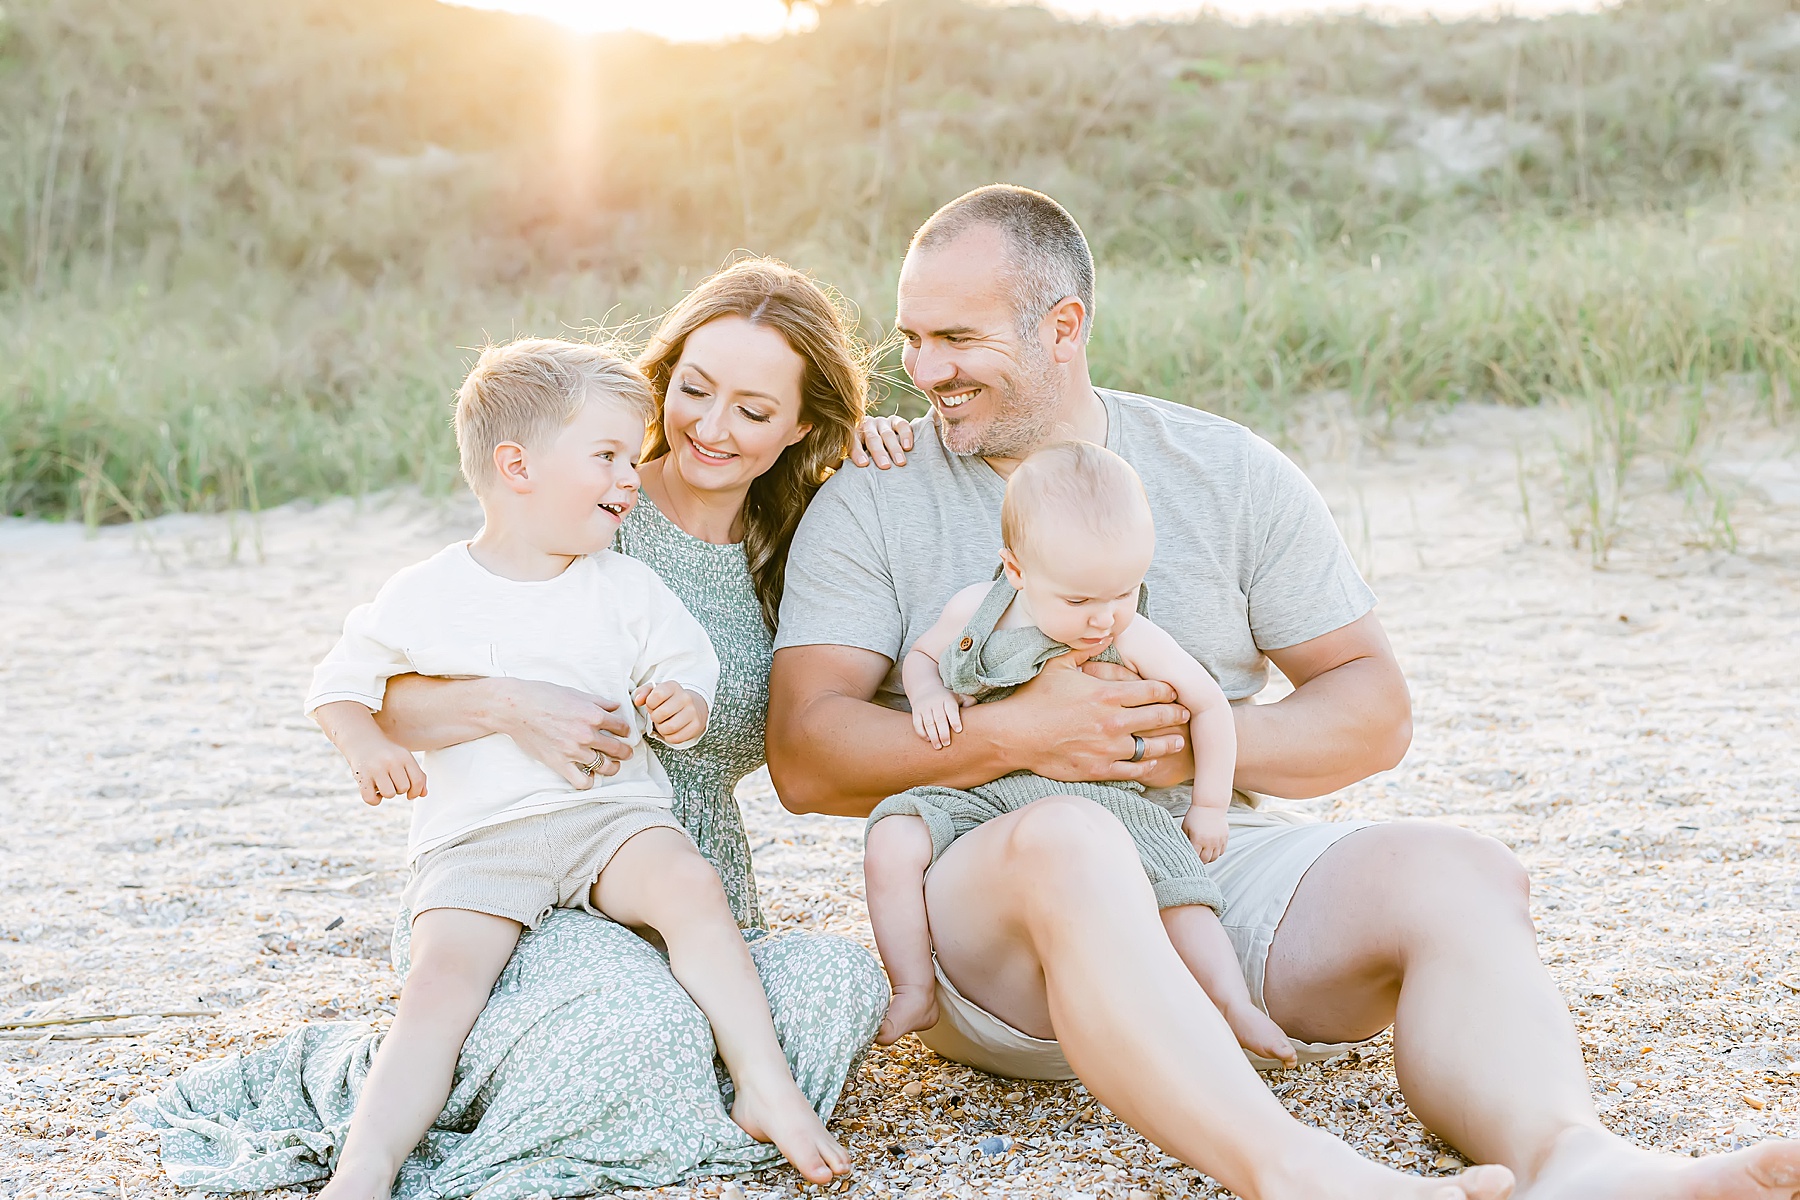 family sitting together on the beach at sunset wearing neutral colors